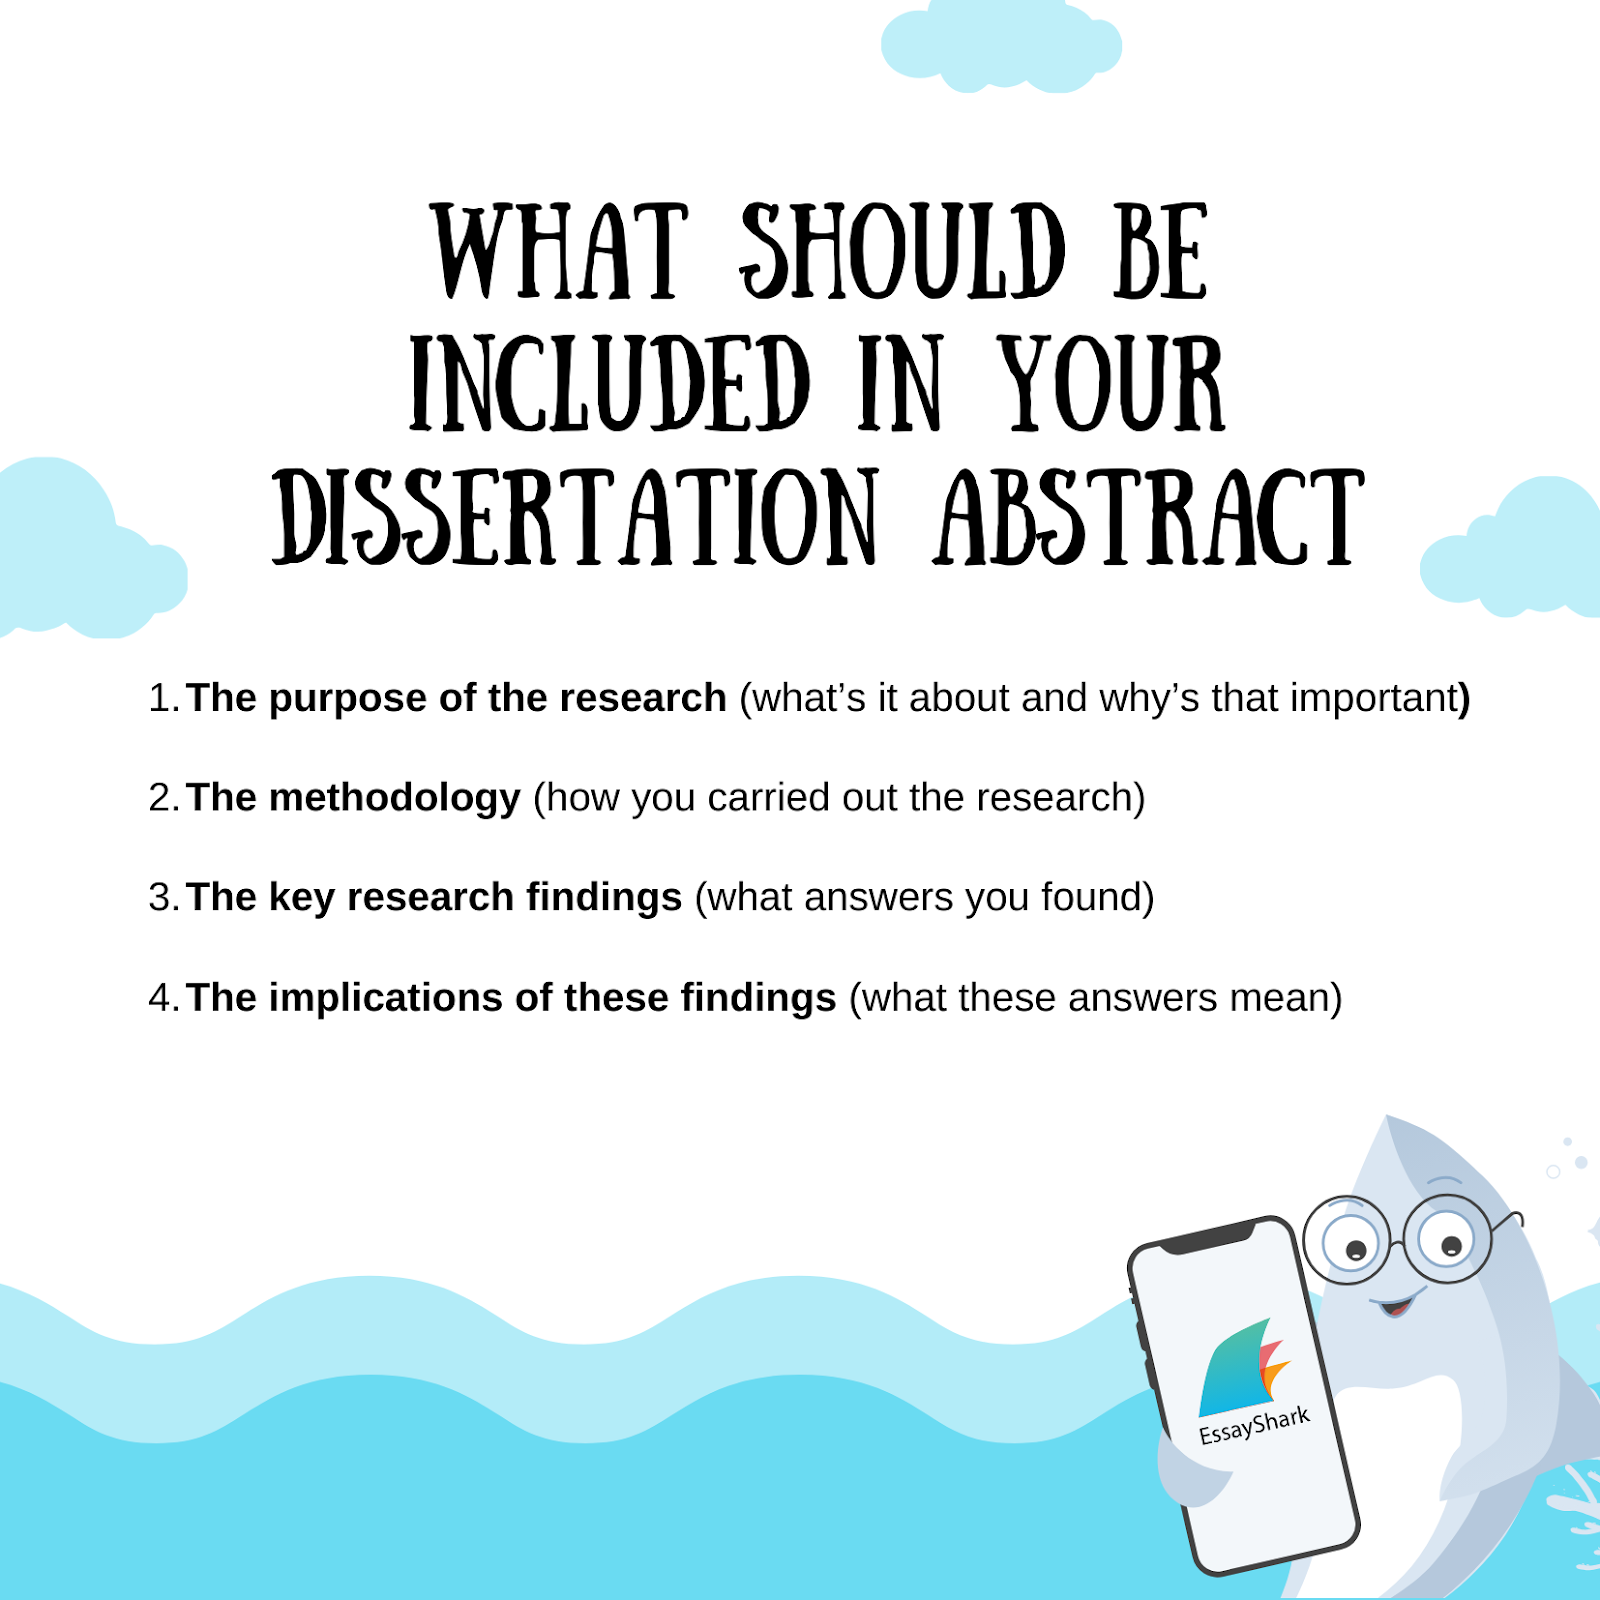 Steps to Writing the Dissertation Abstract